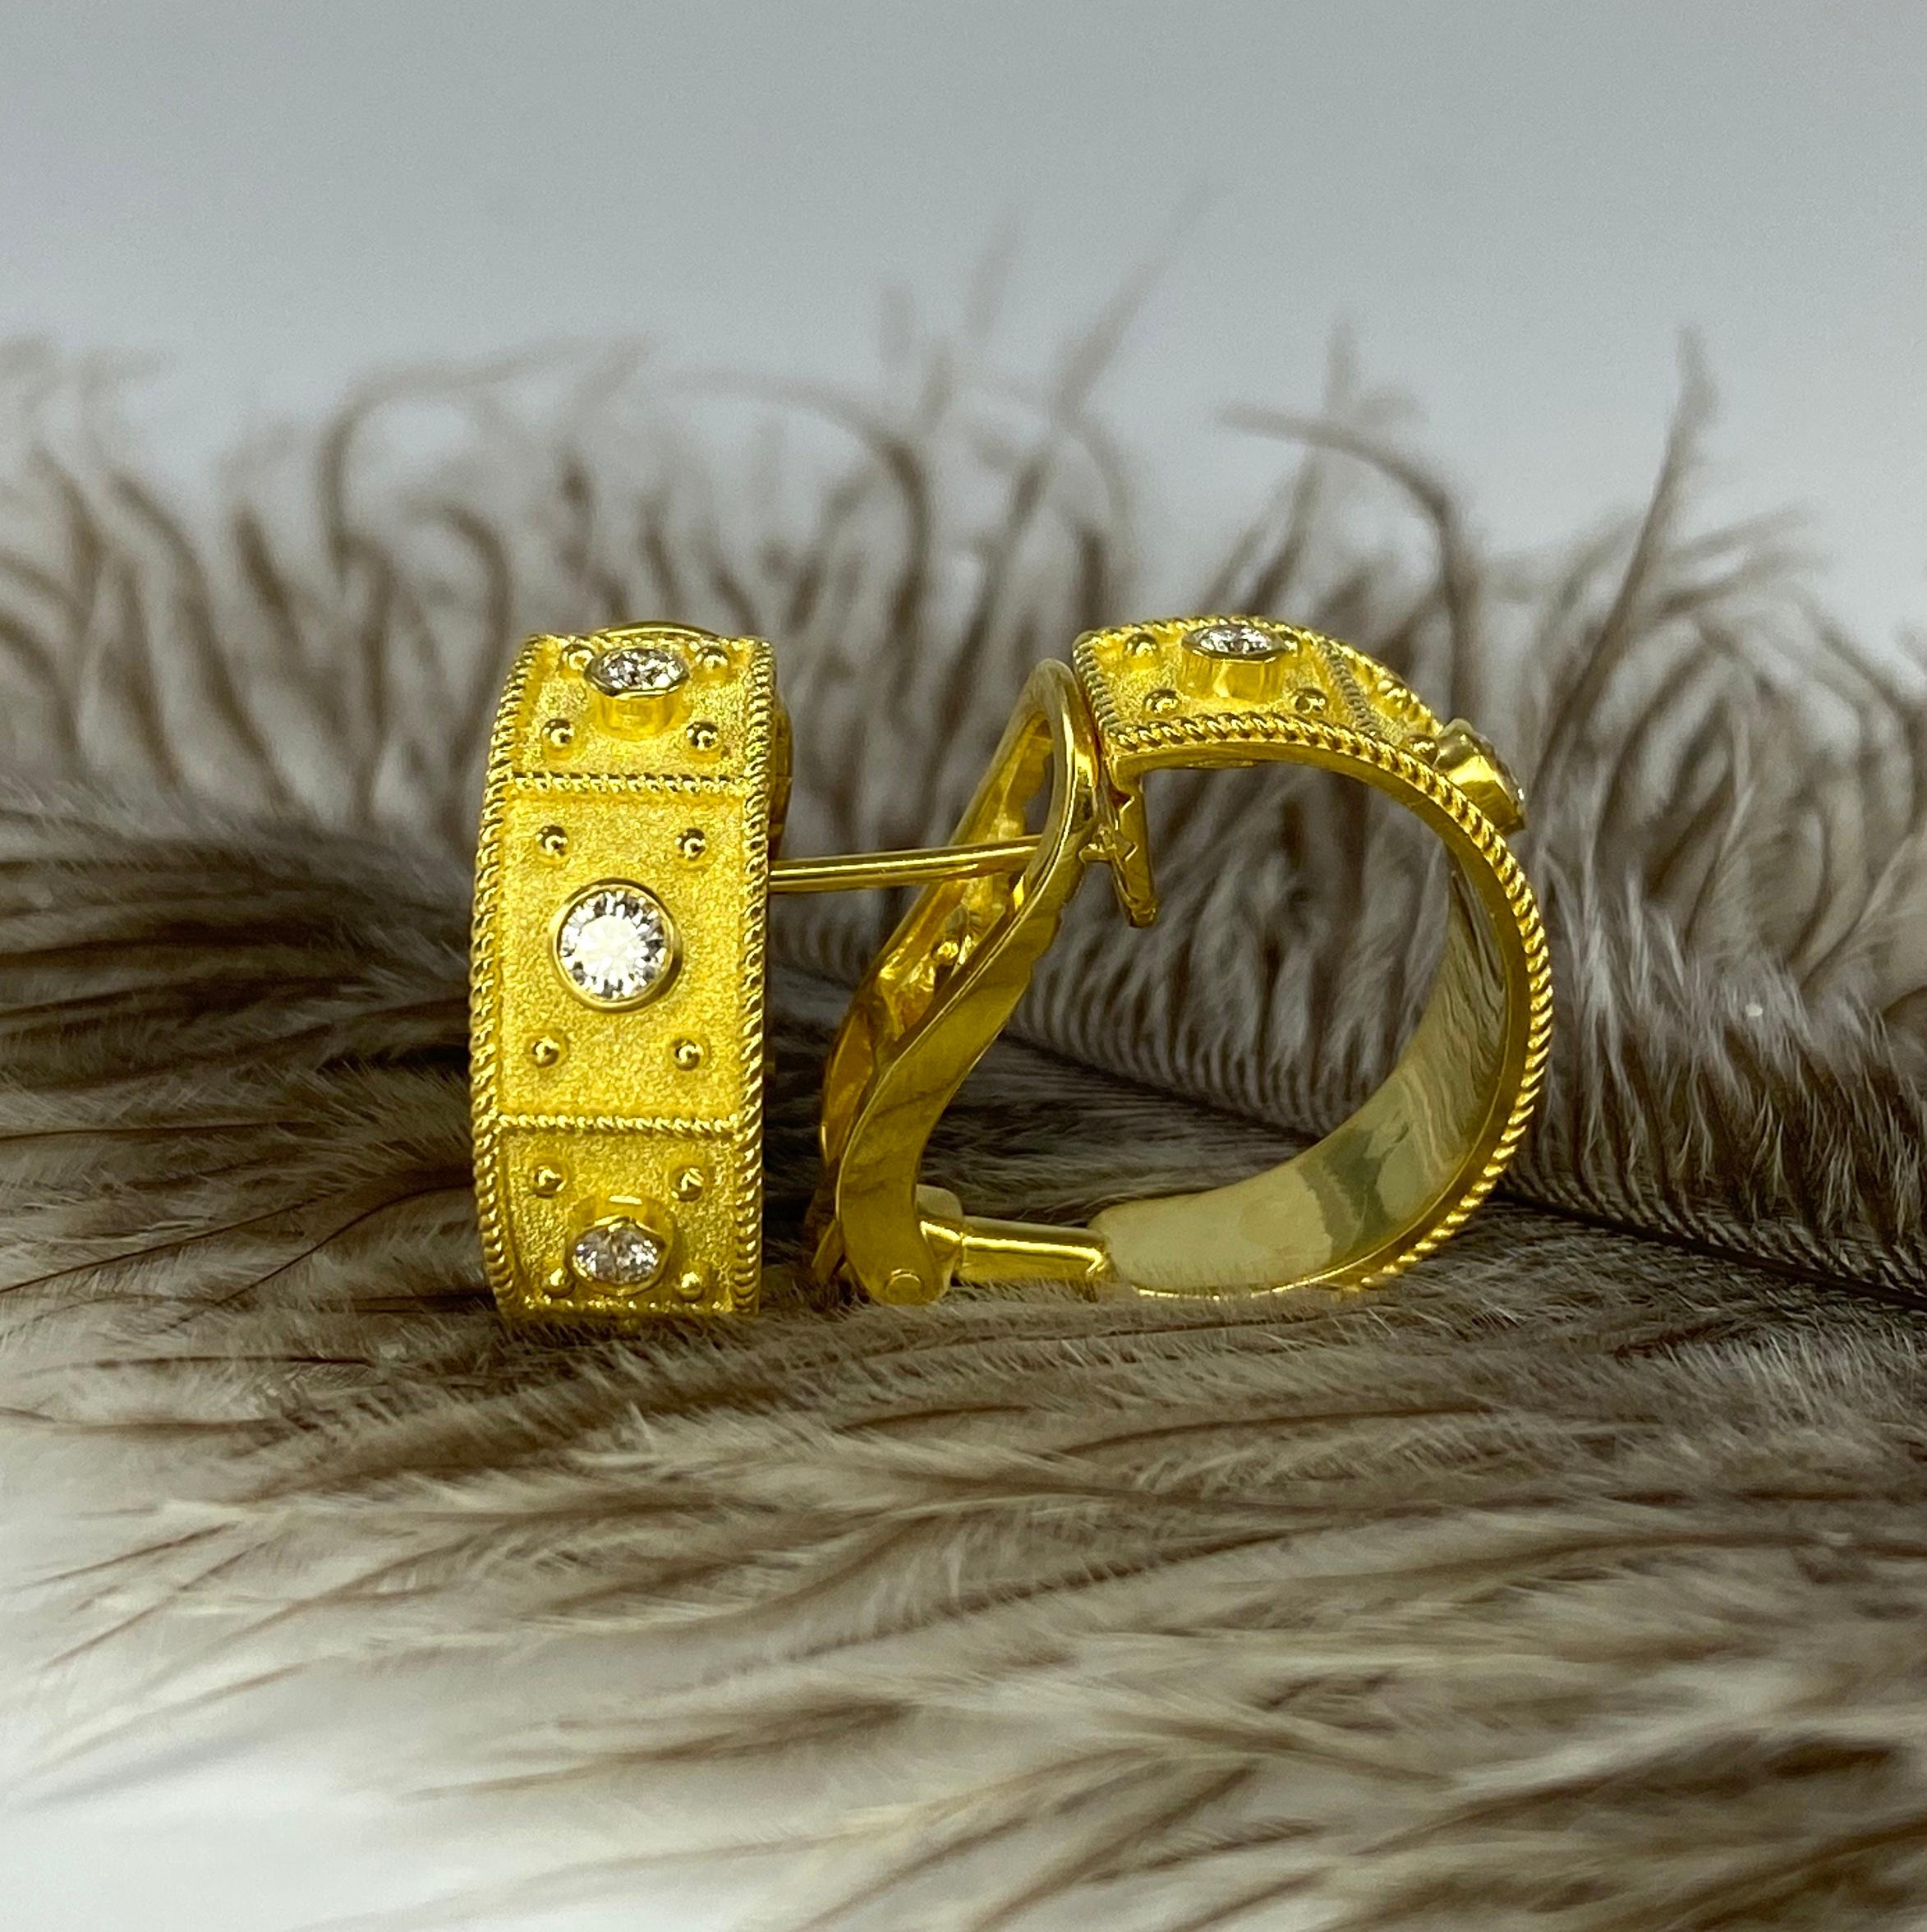 S.Georgios designer earrings are custom crafted from 18 Karat yellow gold and decorated in Byzantine style with granulation work and velvet background and featuring 0.46 carat brilliant cut white diamonds. These gorgeous pierced and clip earrings